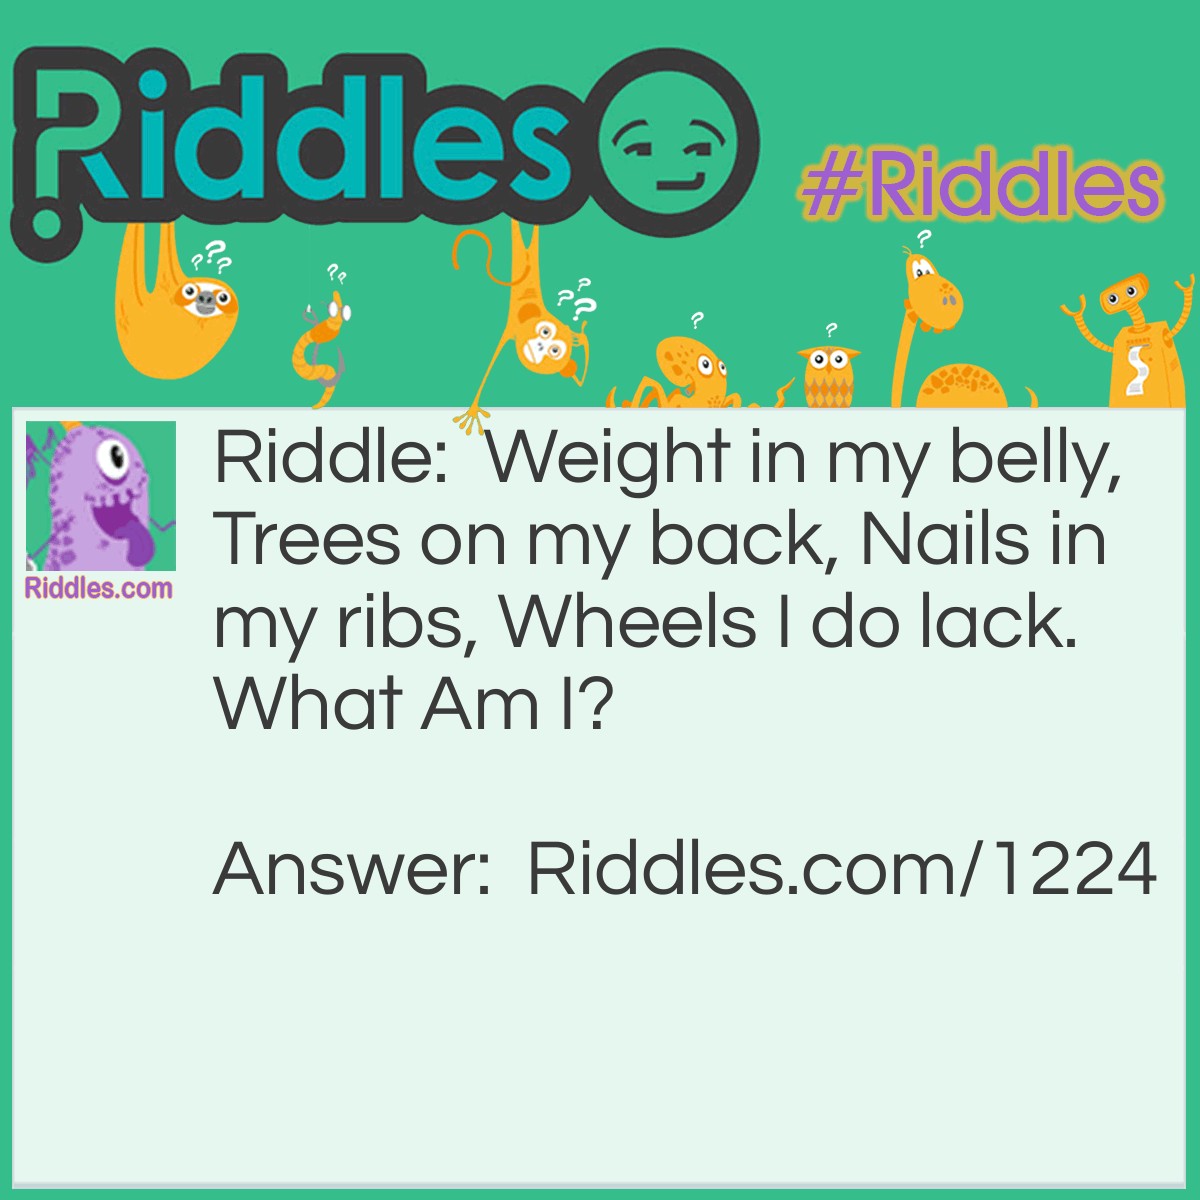 Riddle: Weight in my belly, Trees on my back, Nails in my ribs, Wheels I do lack.
What Am I? Answer: a ship